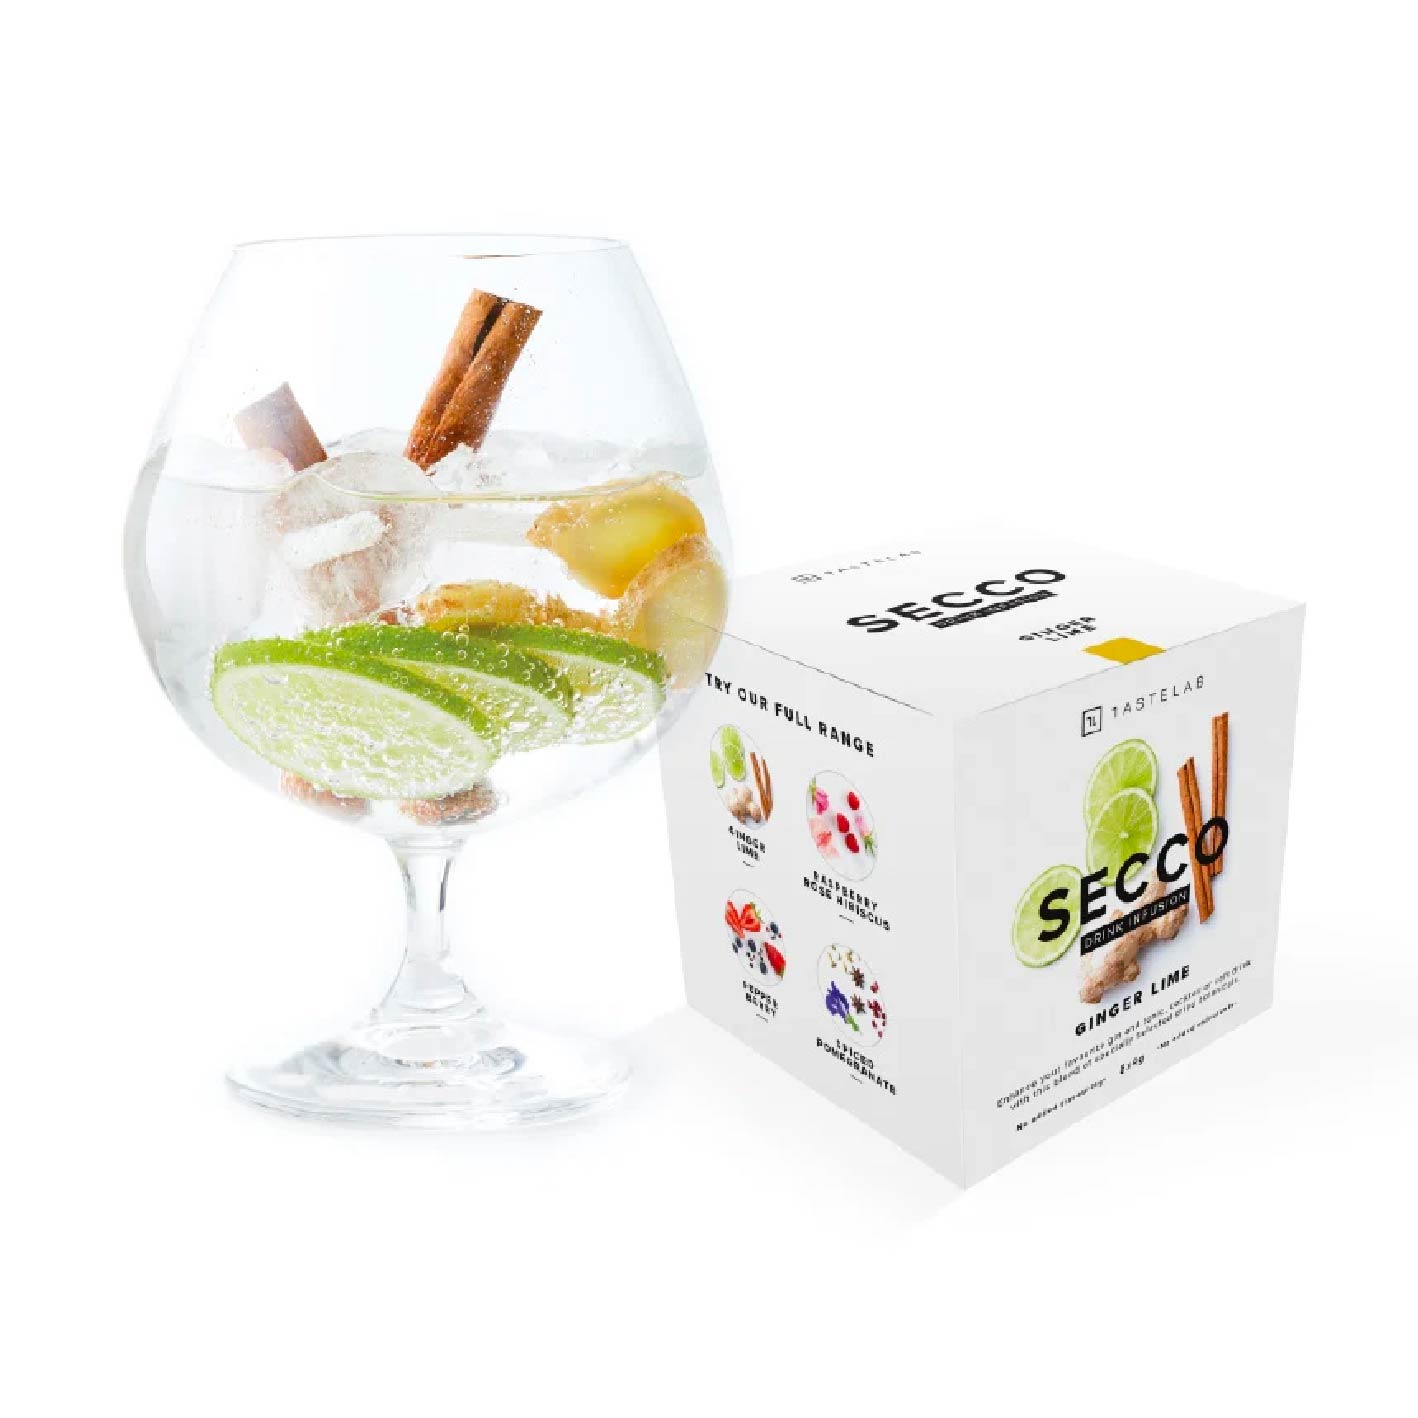 Tastelab – Secco Drink Infusion, Ginger Lime, 8 sachets per box